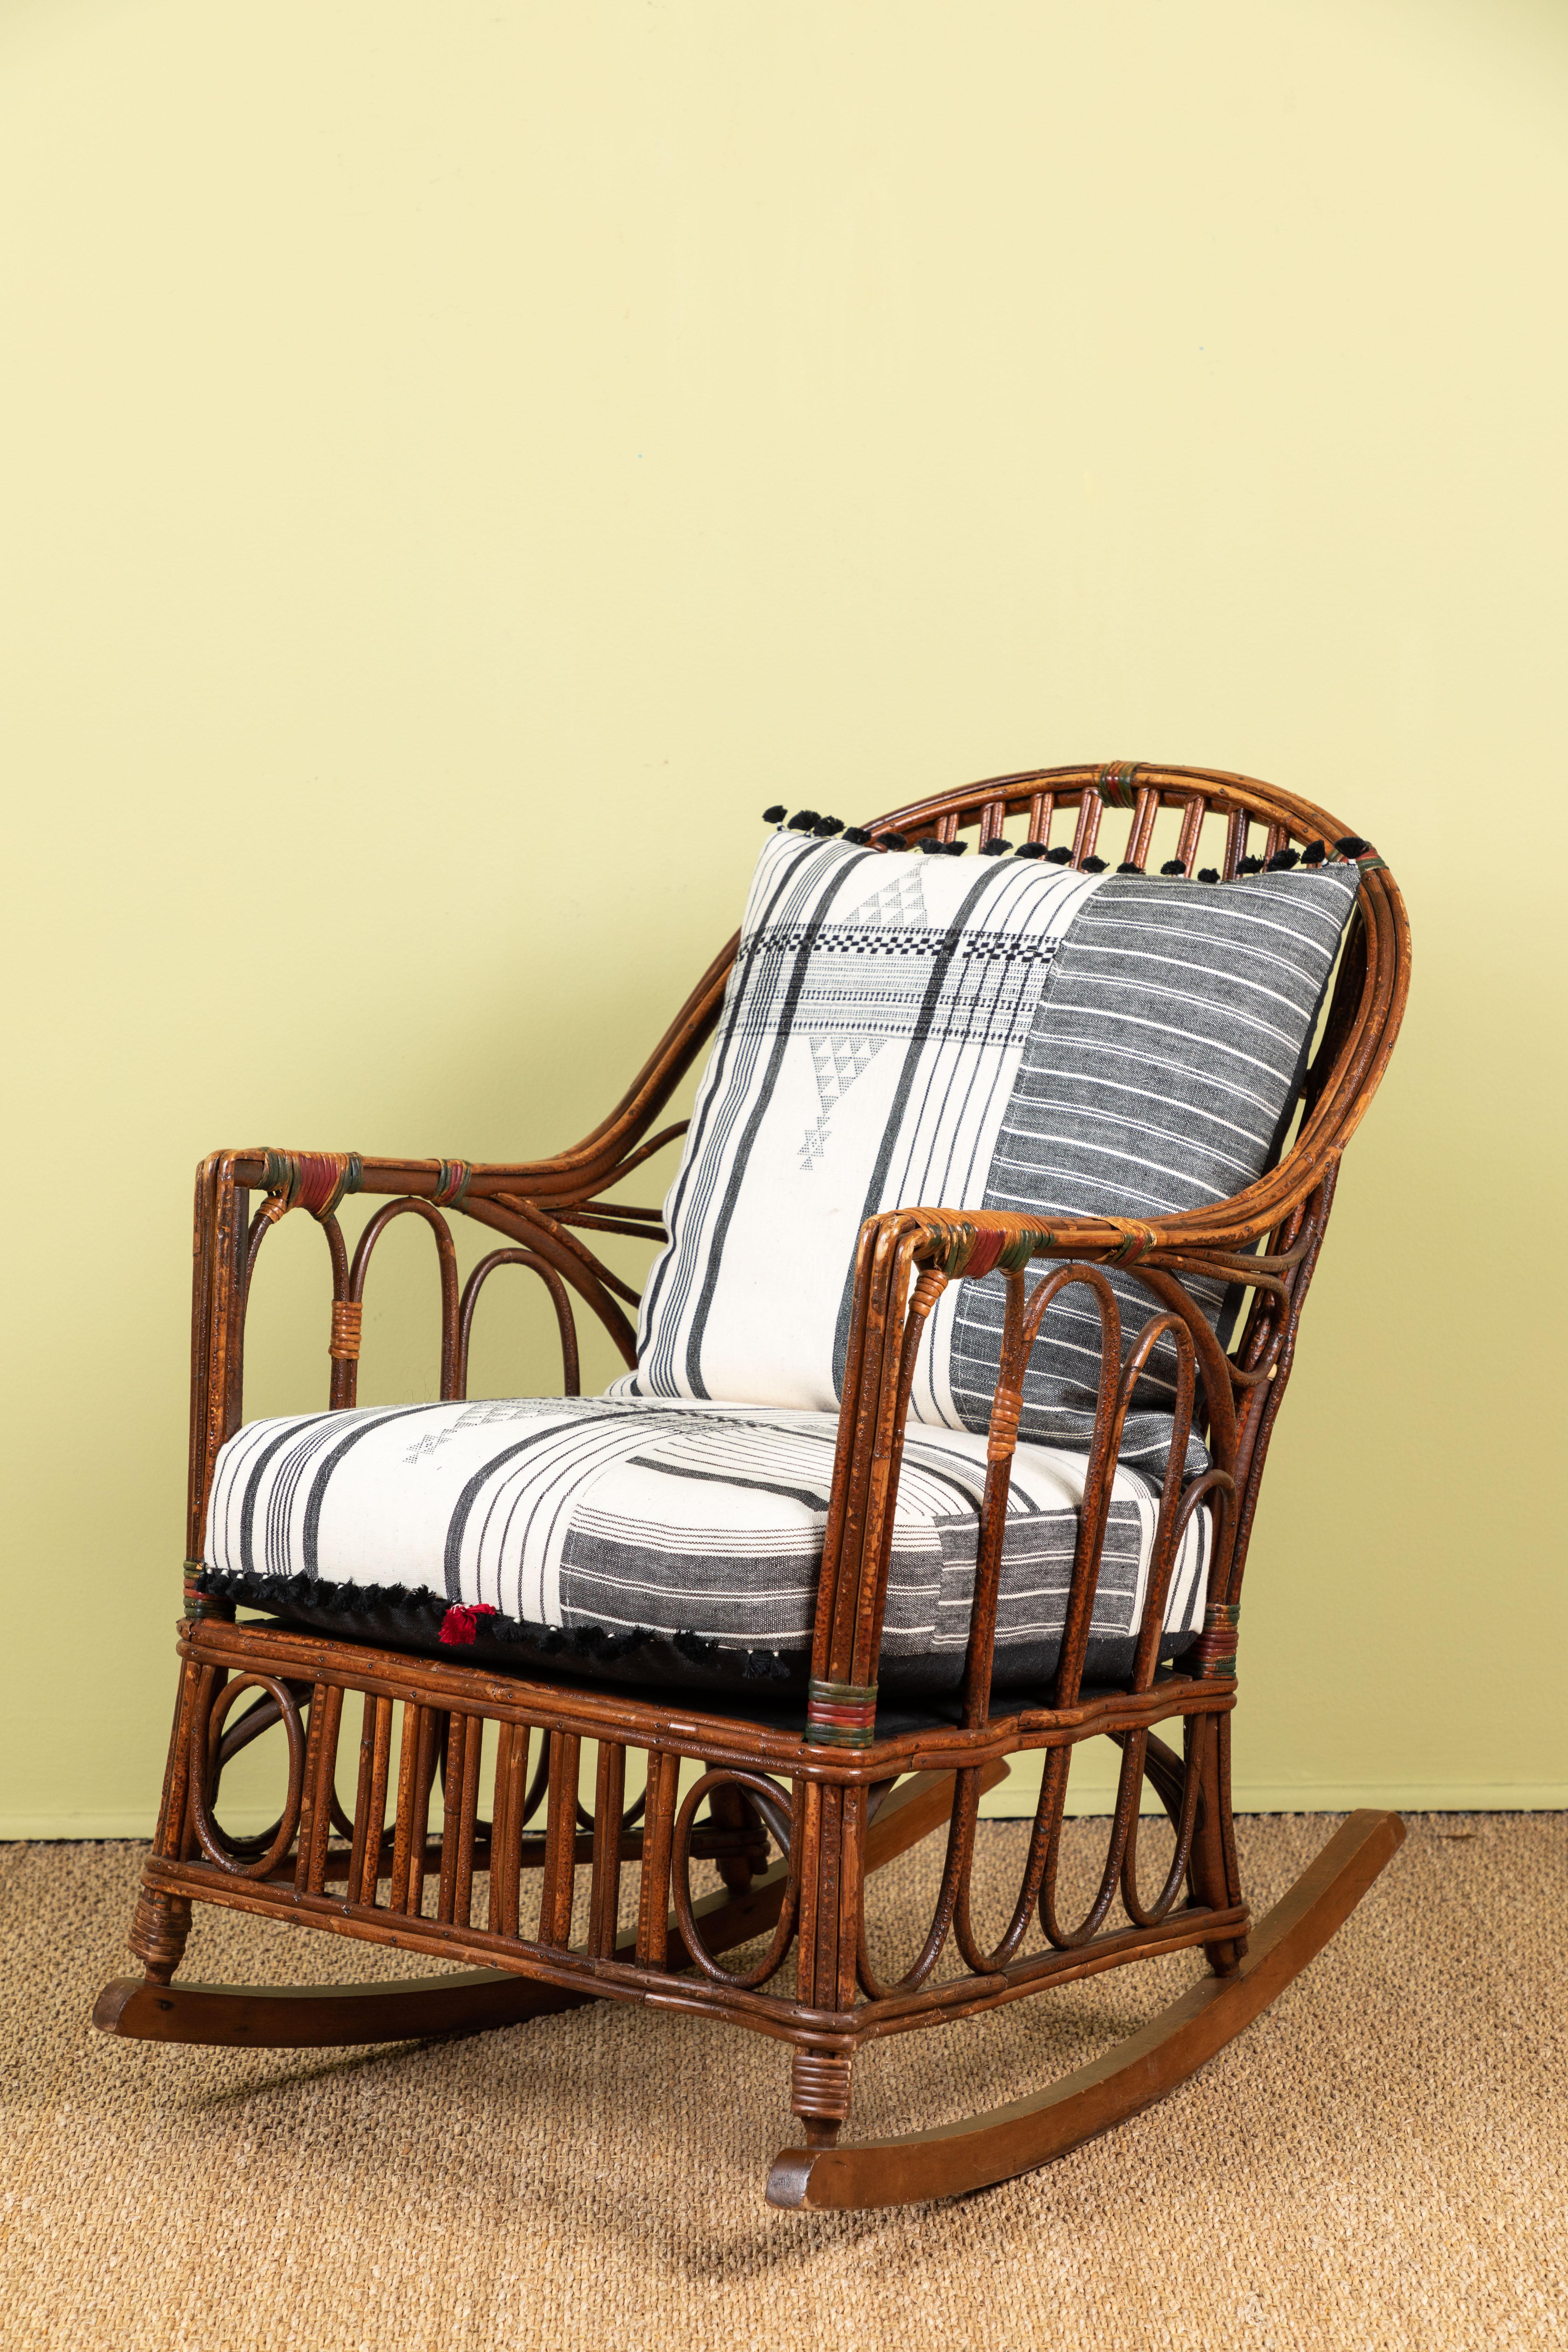 Classic East Coast Americana rocking chair with cushions made of Injiri organic cotton textiles from India. Textile has areas of hand embroidery and hand tied tassels at edges. Part of a set with upright chair and love seat but can be purchased